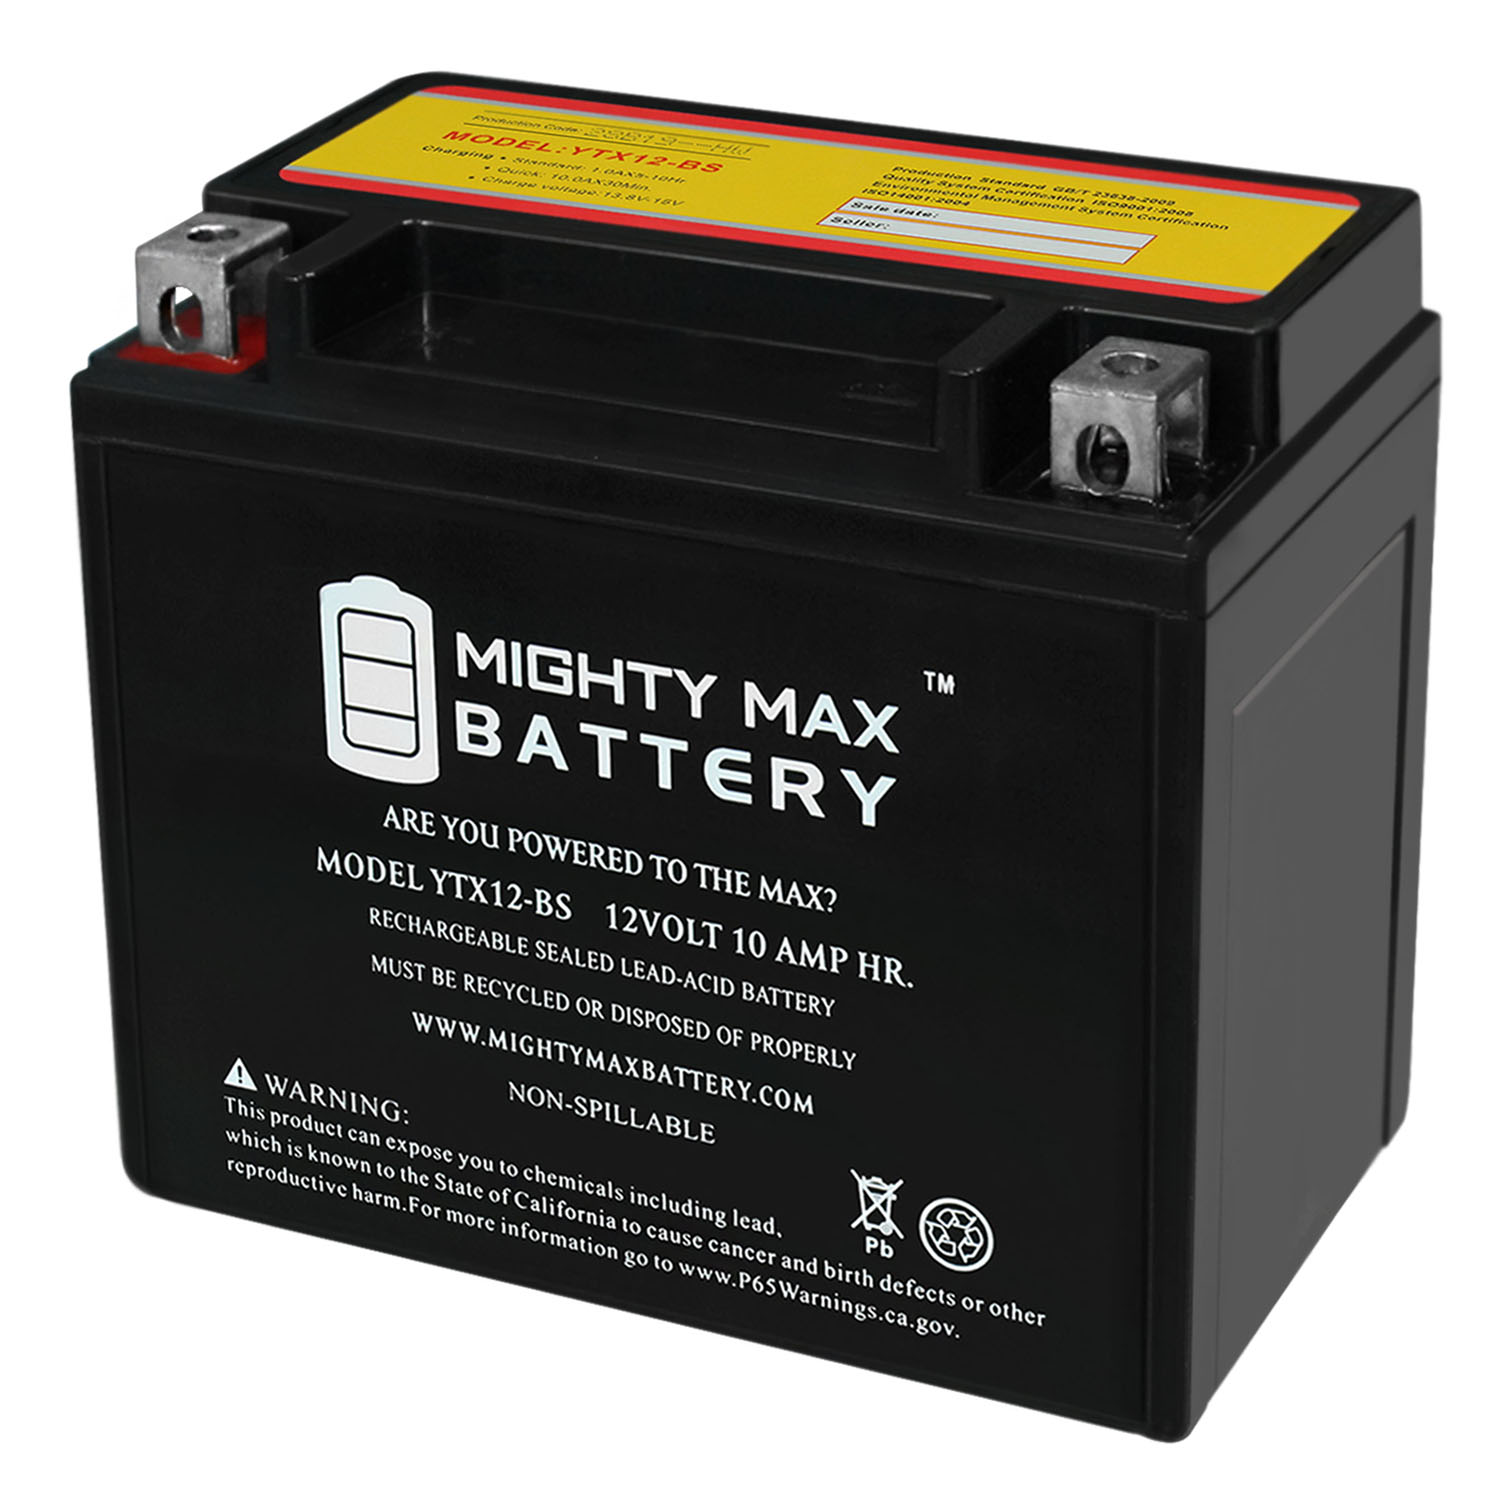 YTX12-BS Power Sports Battery Replaces GTX12-BS, M3RH2S, 44016